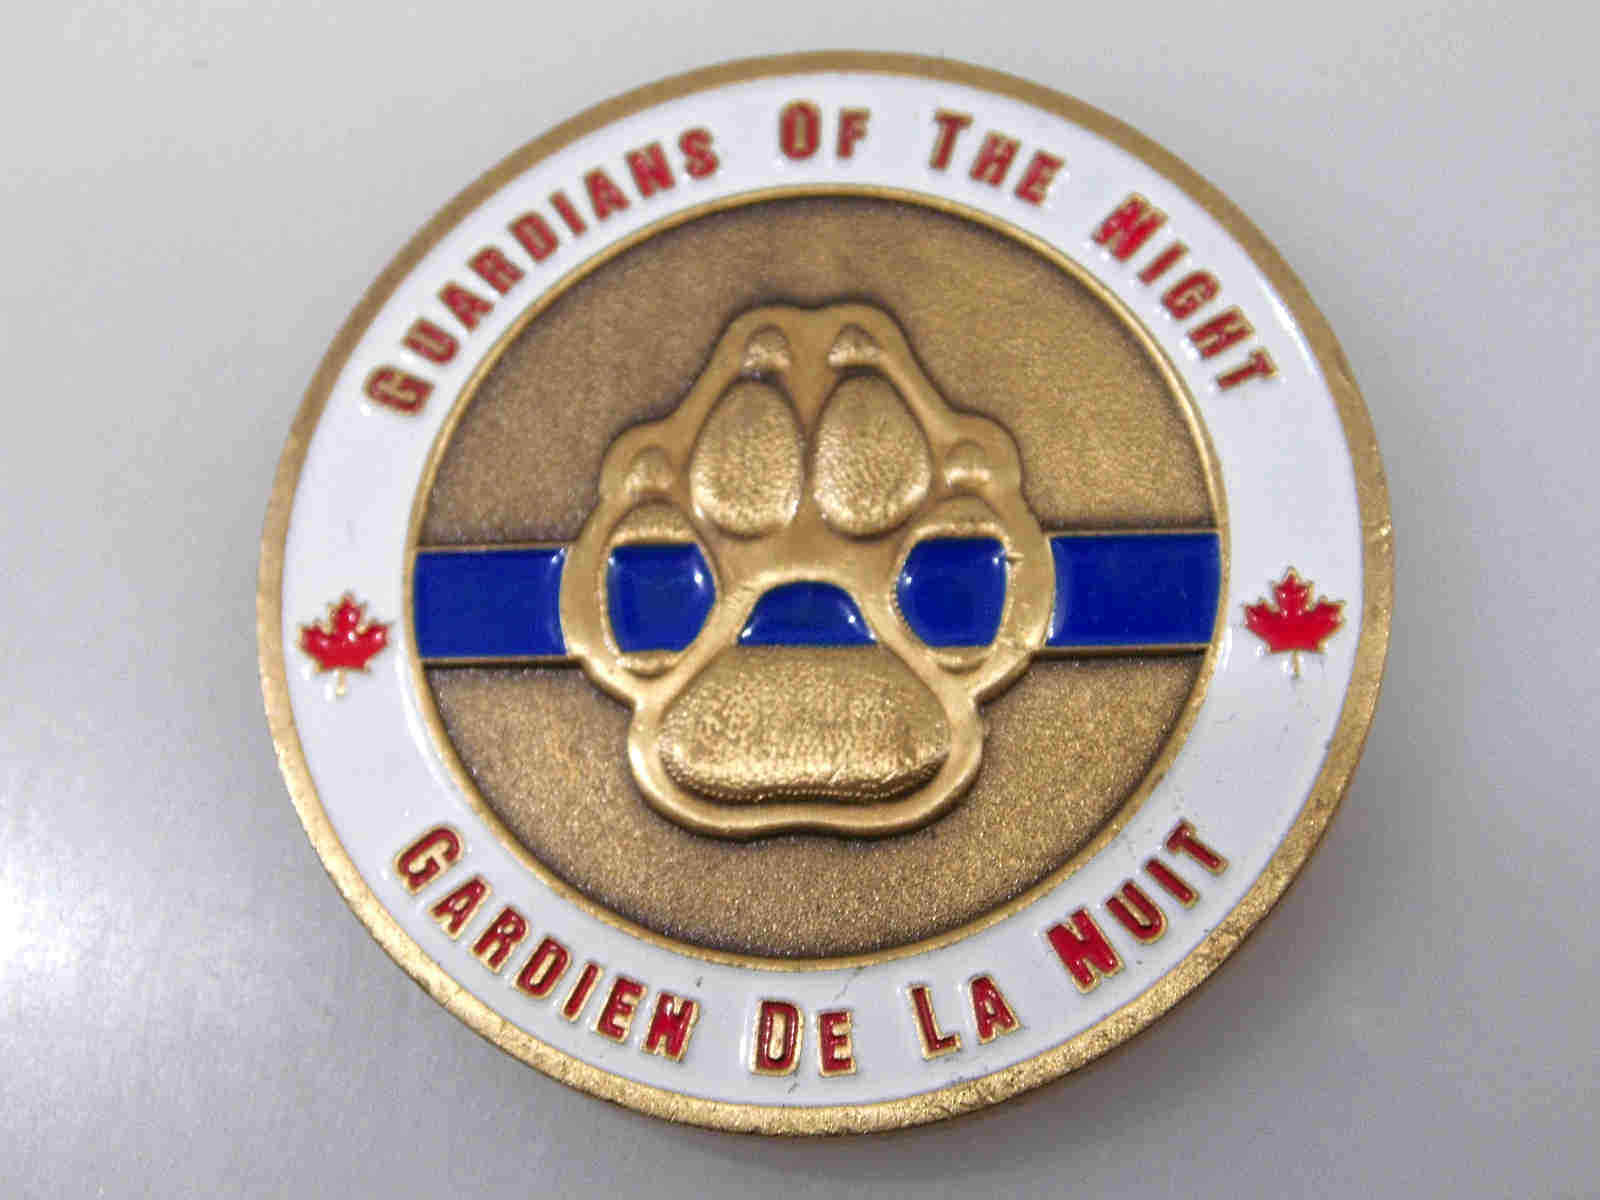 CANADIAN POLICE CANINE ASSOCIATION CANADIENNE DE CHIENS POLICERS CHALLENGE COIN